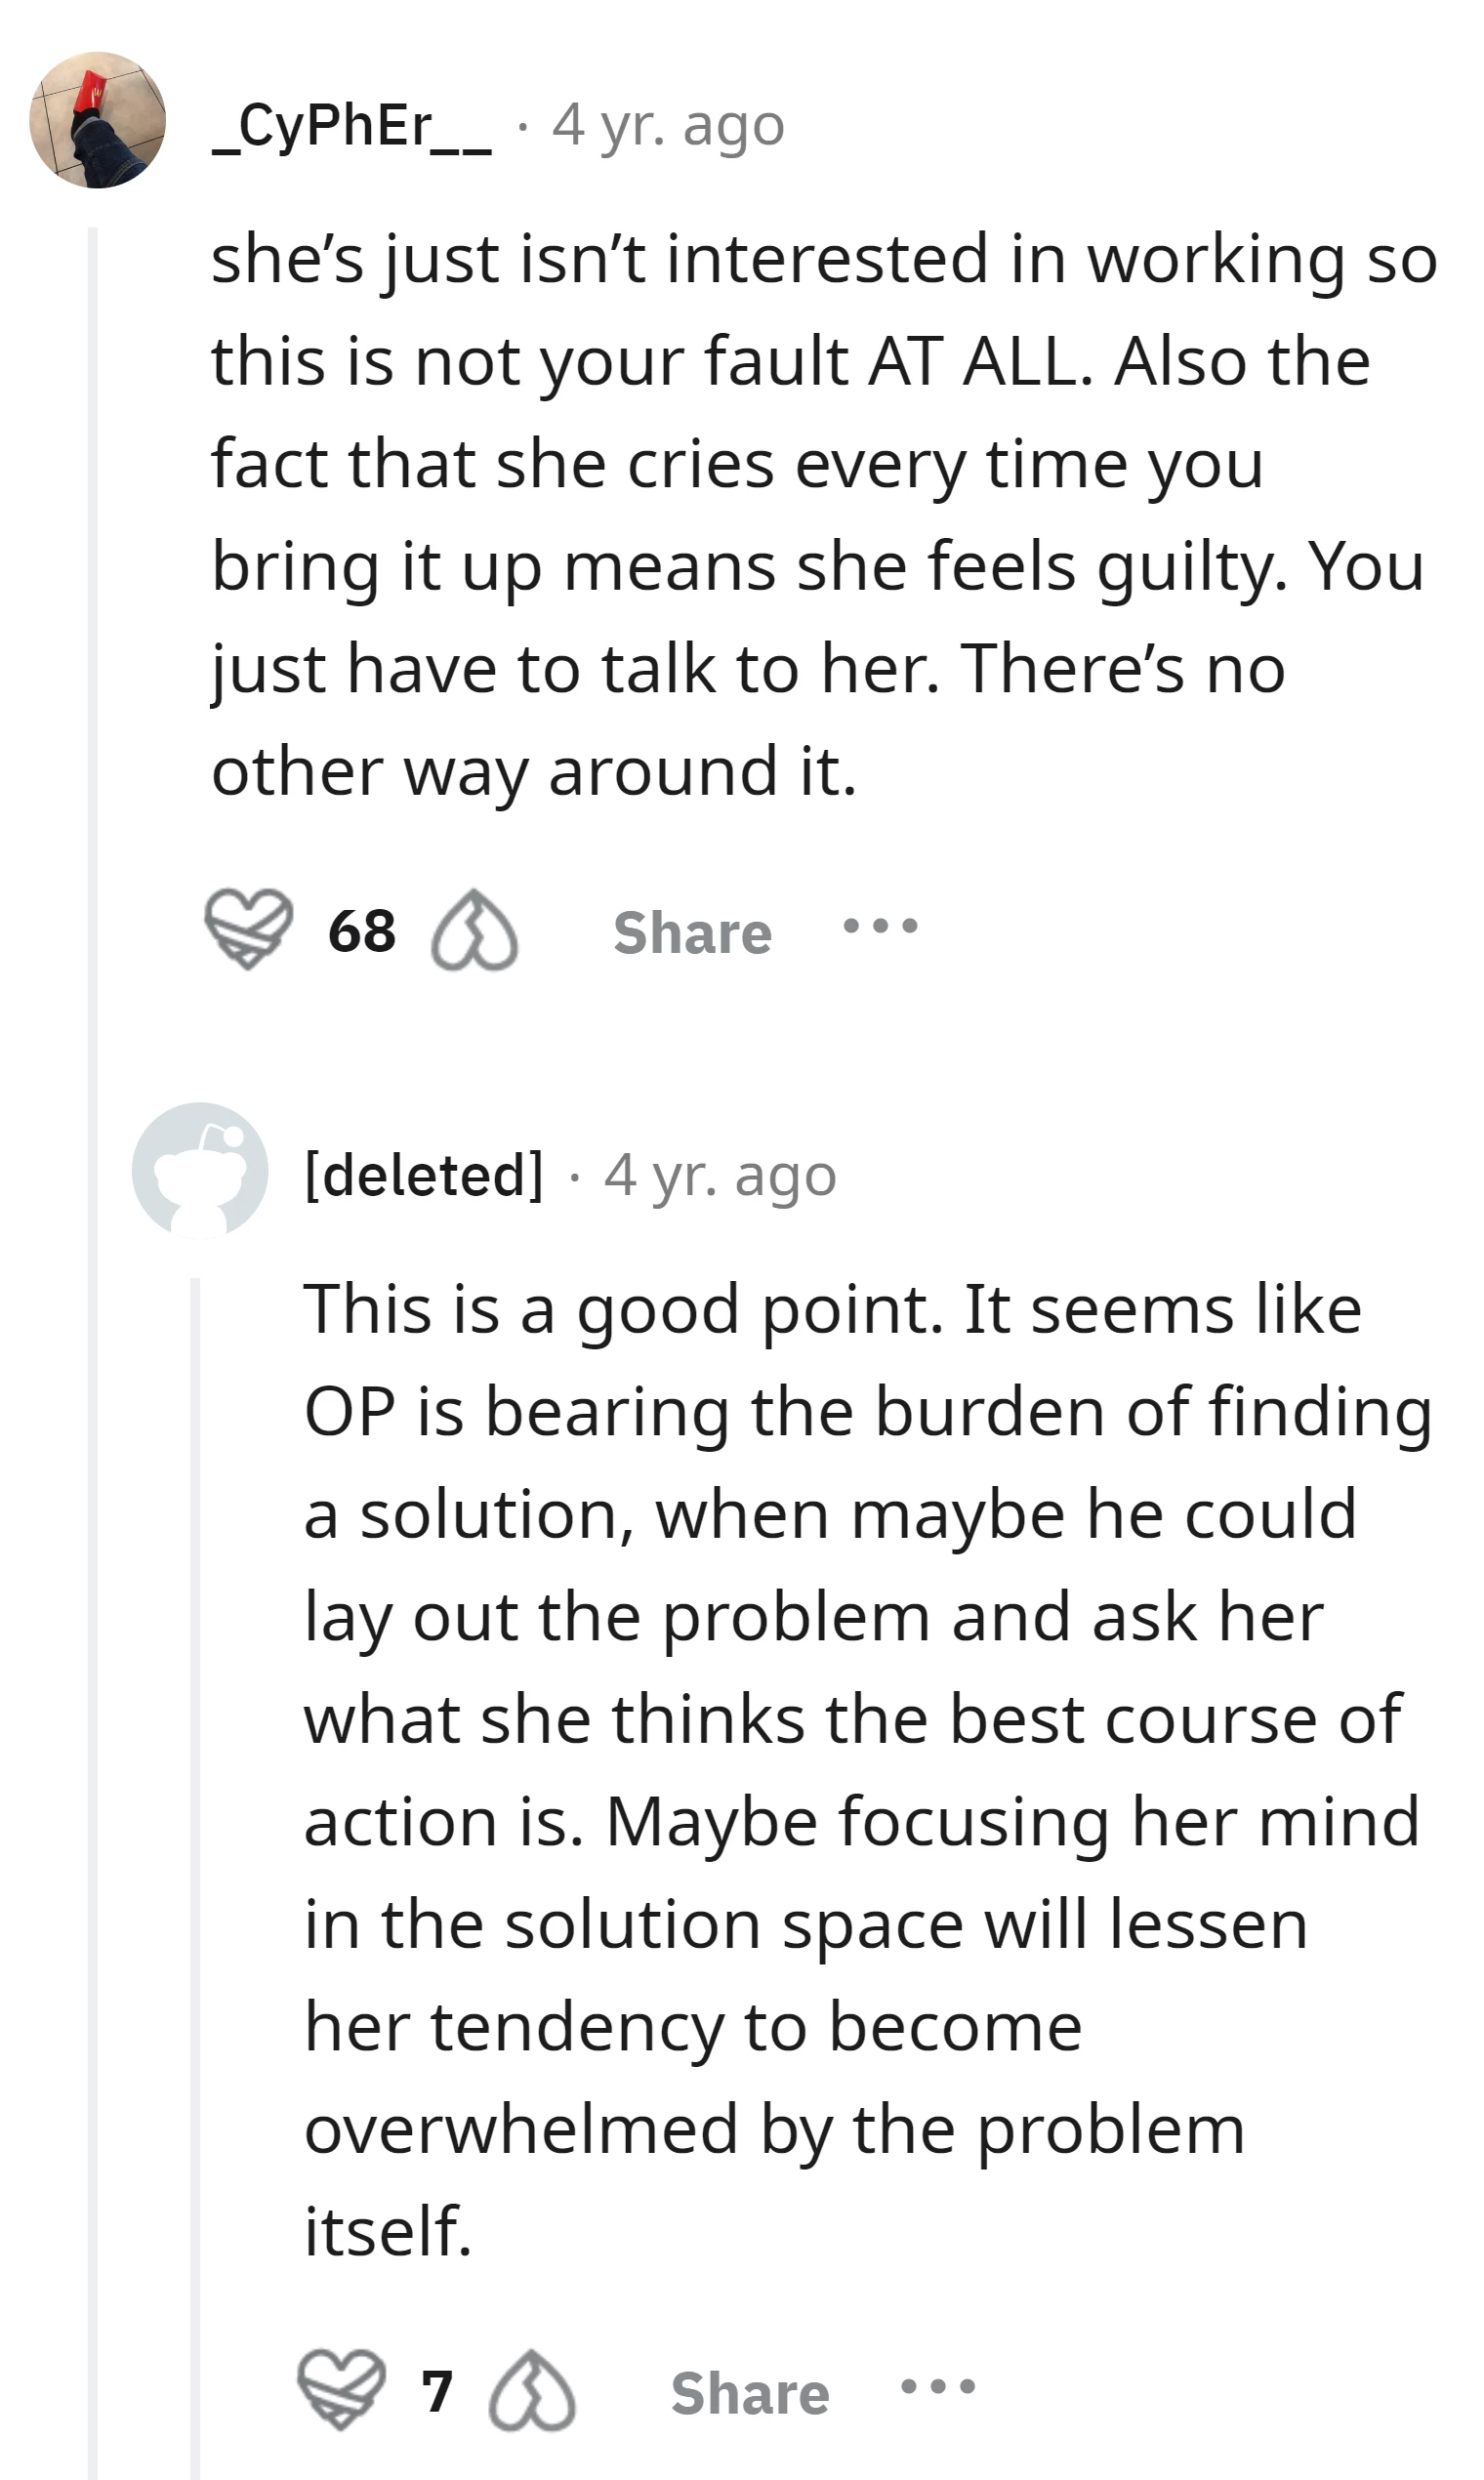 This Redditor reassures the OP that the situation is not his fault